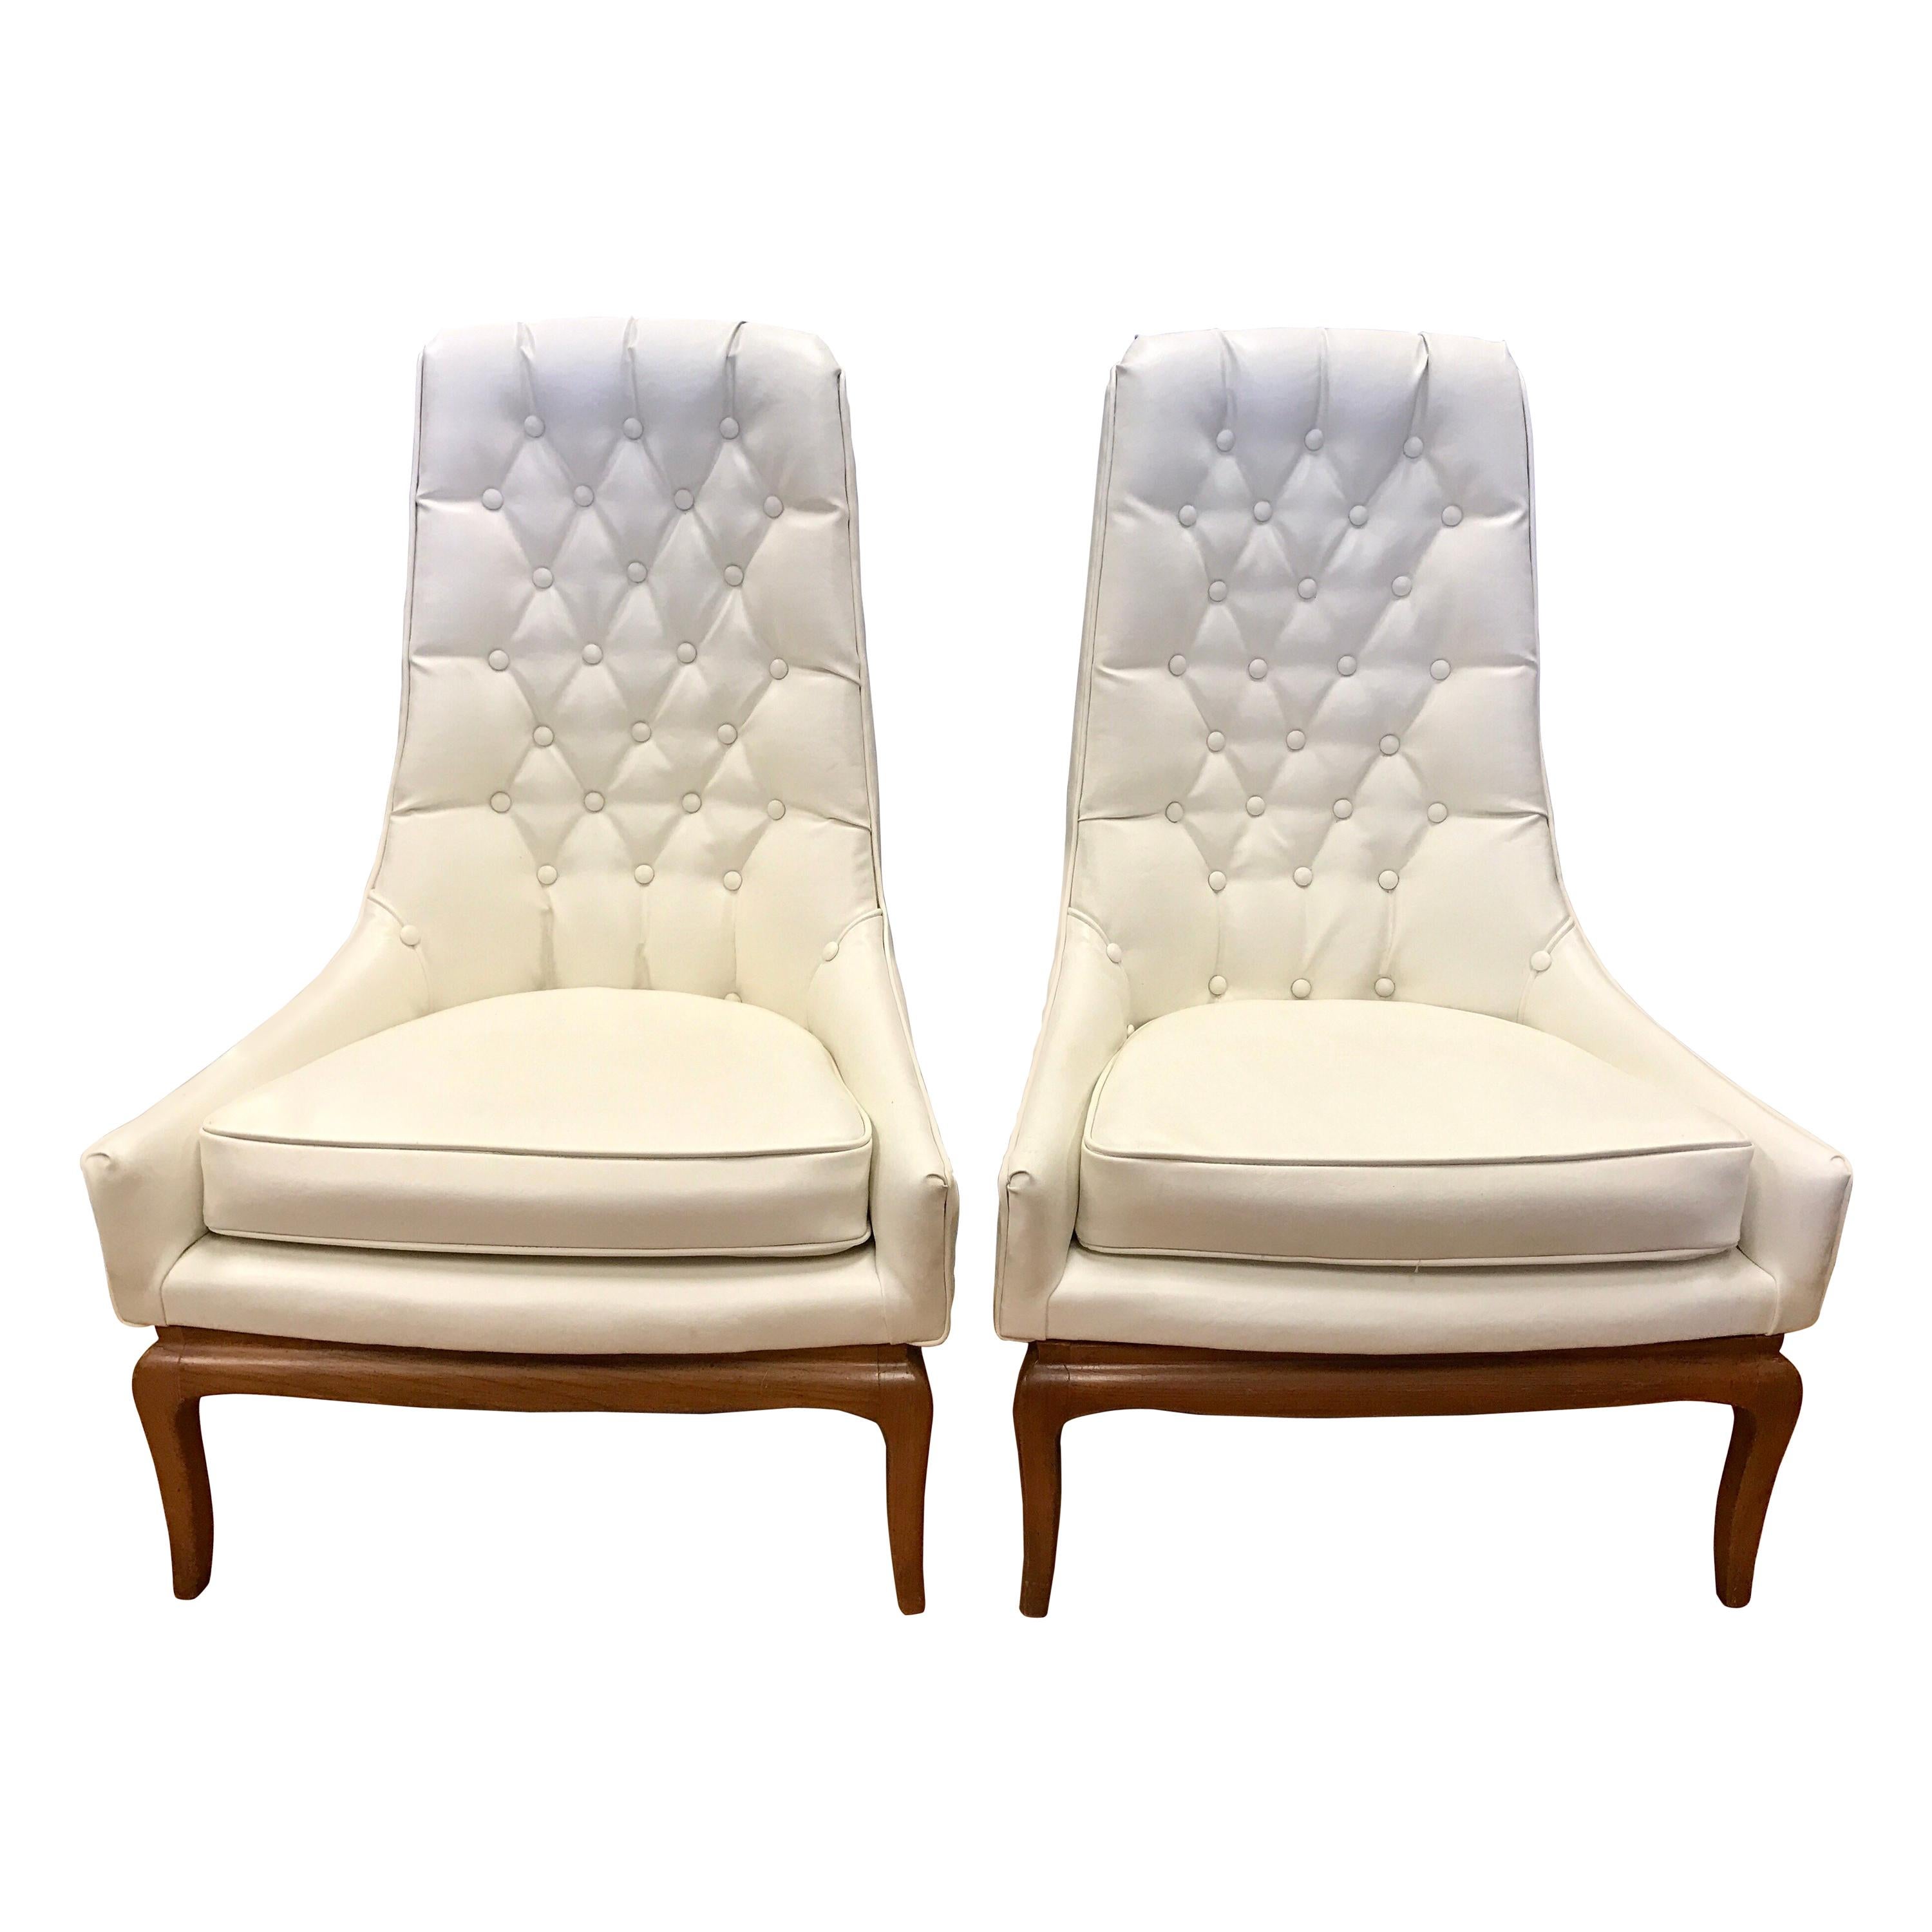 Pair of Midcentury Widdicomb Robsjohn-Gibbings Quilted White Tufted Tall Chairs